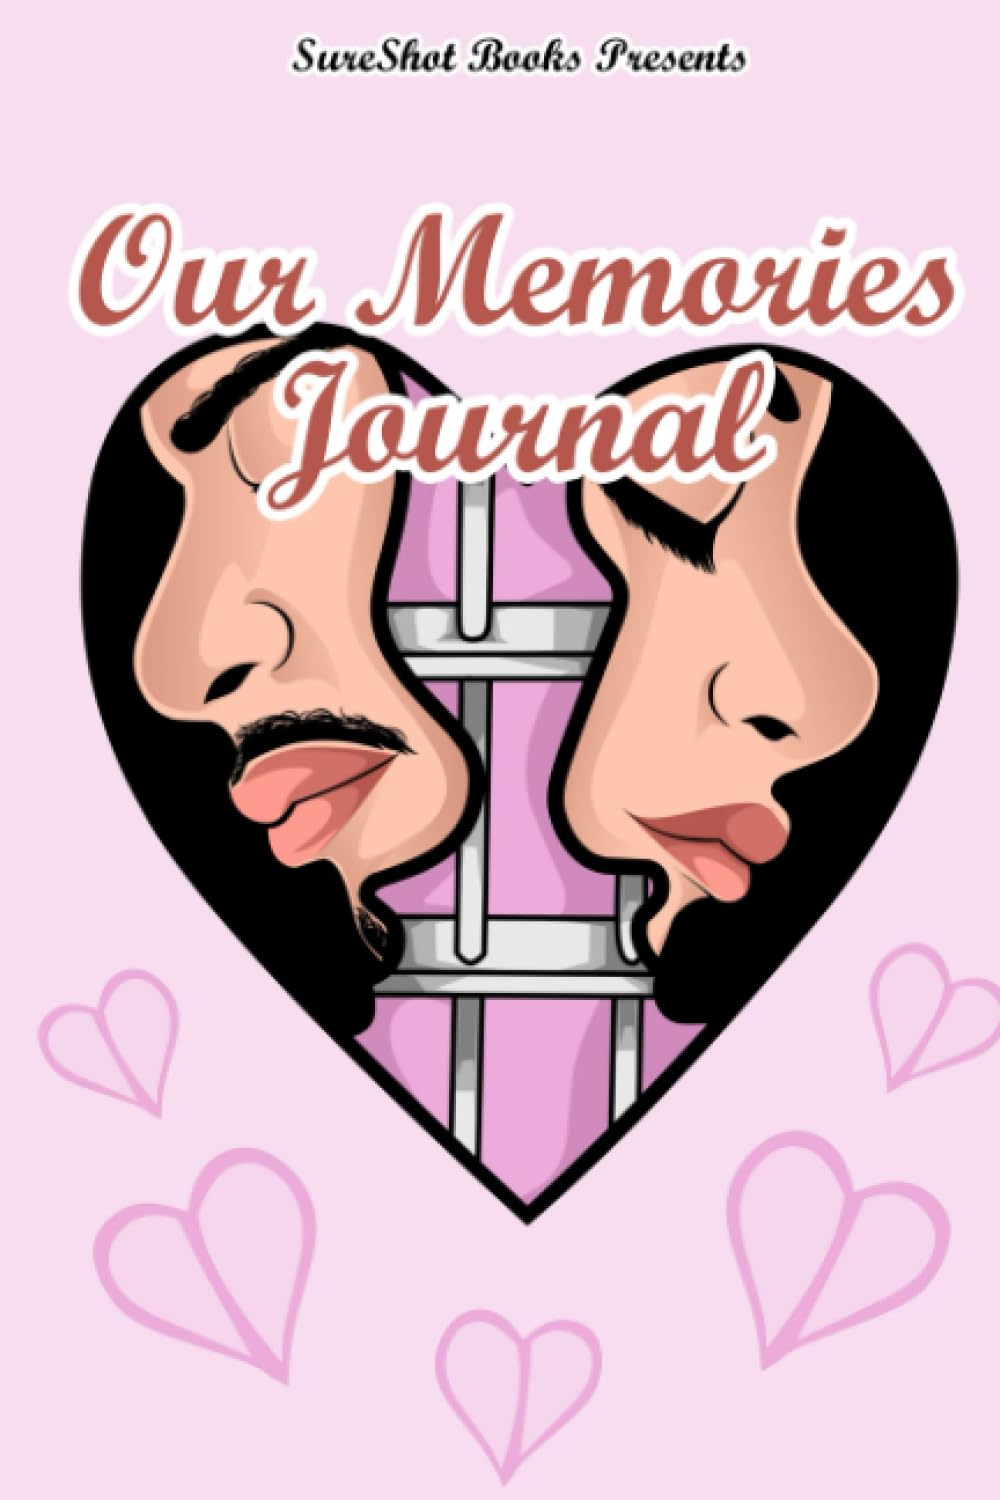 Our Memories Workbook For Inmates Guided Journal With Prompts For Couples In Long-Distance Relationships, Remember and Share Your Favorite Moments - SureShot Books Publishing LLC